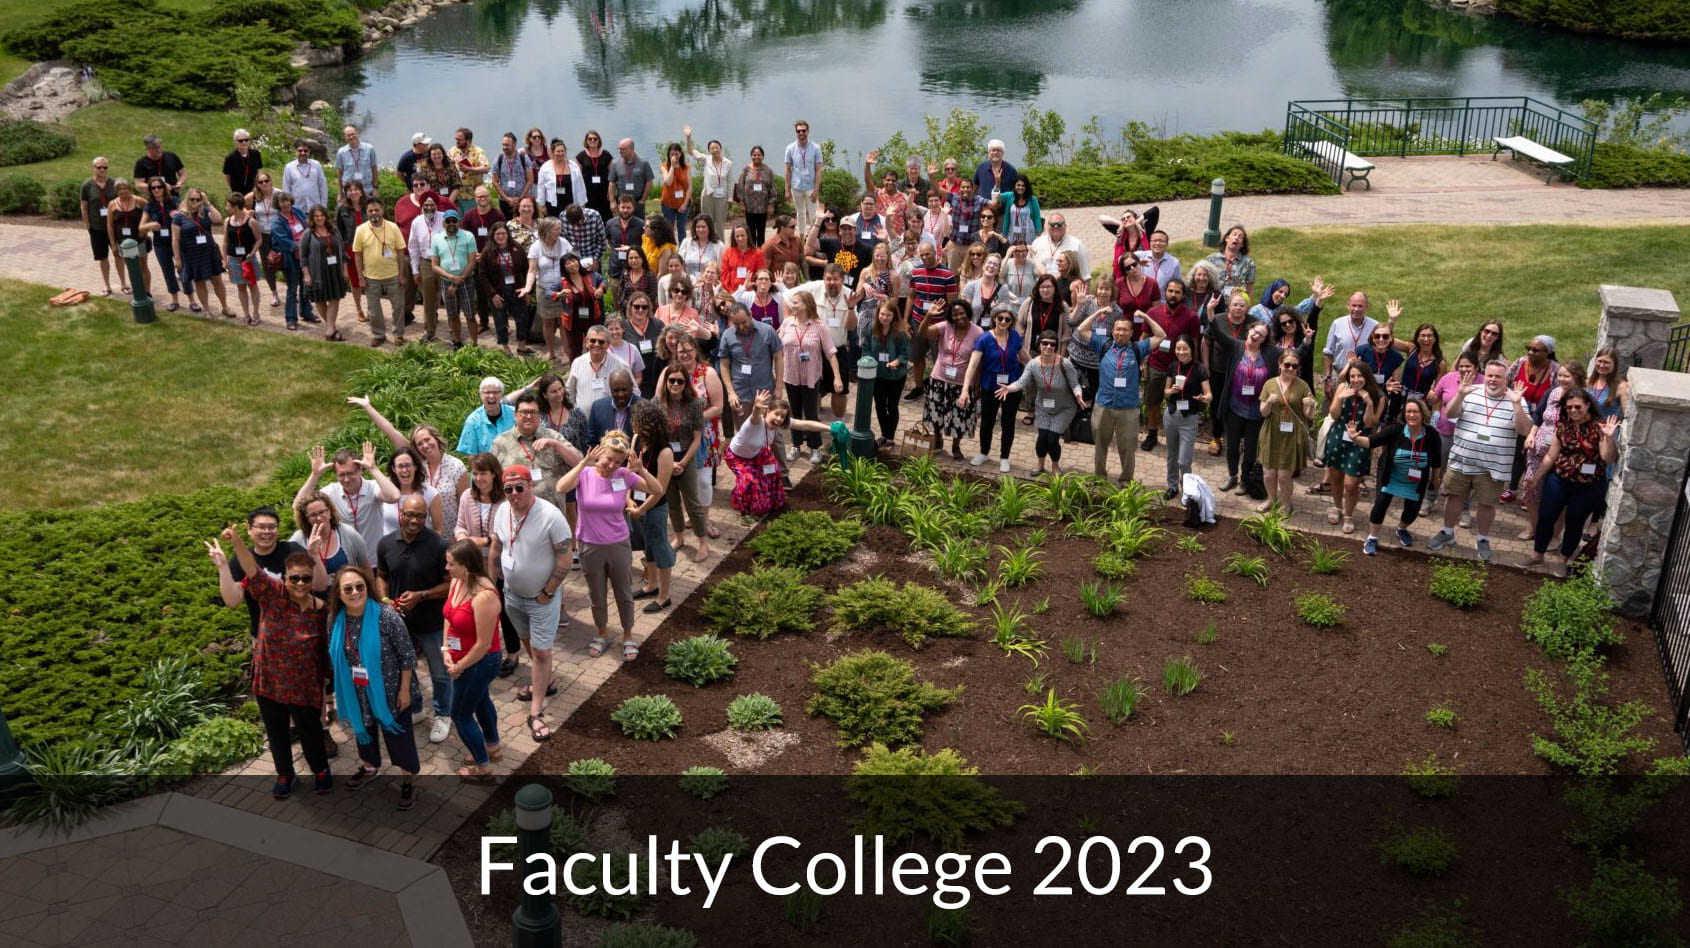 Group photo of Faculty College participants from 2023